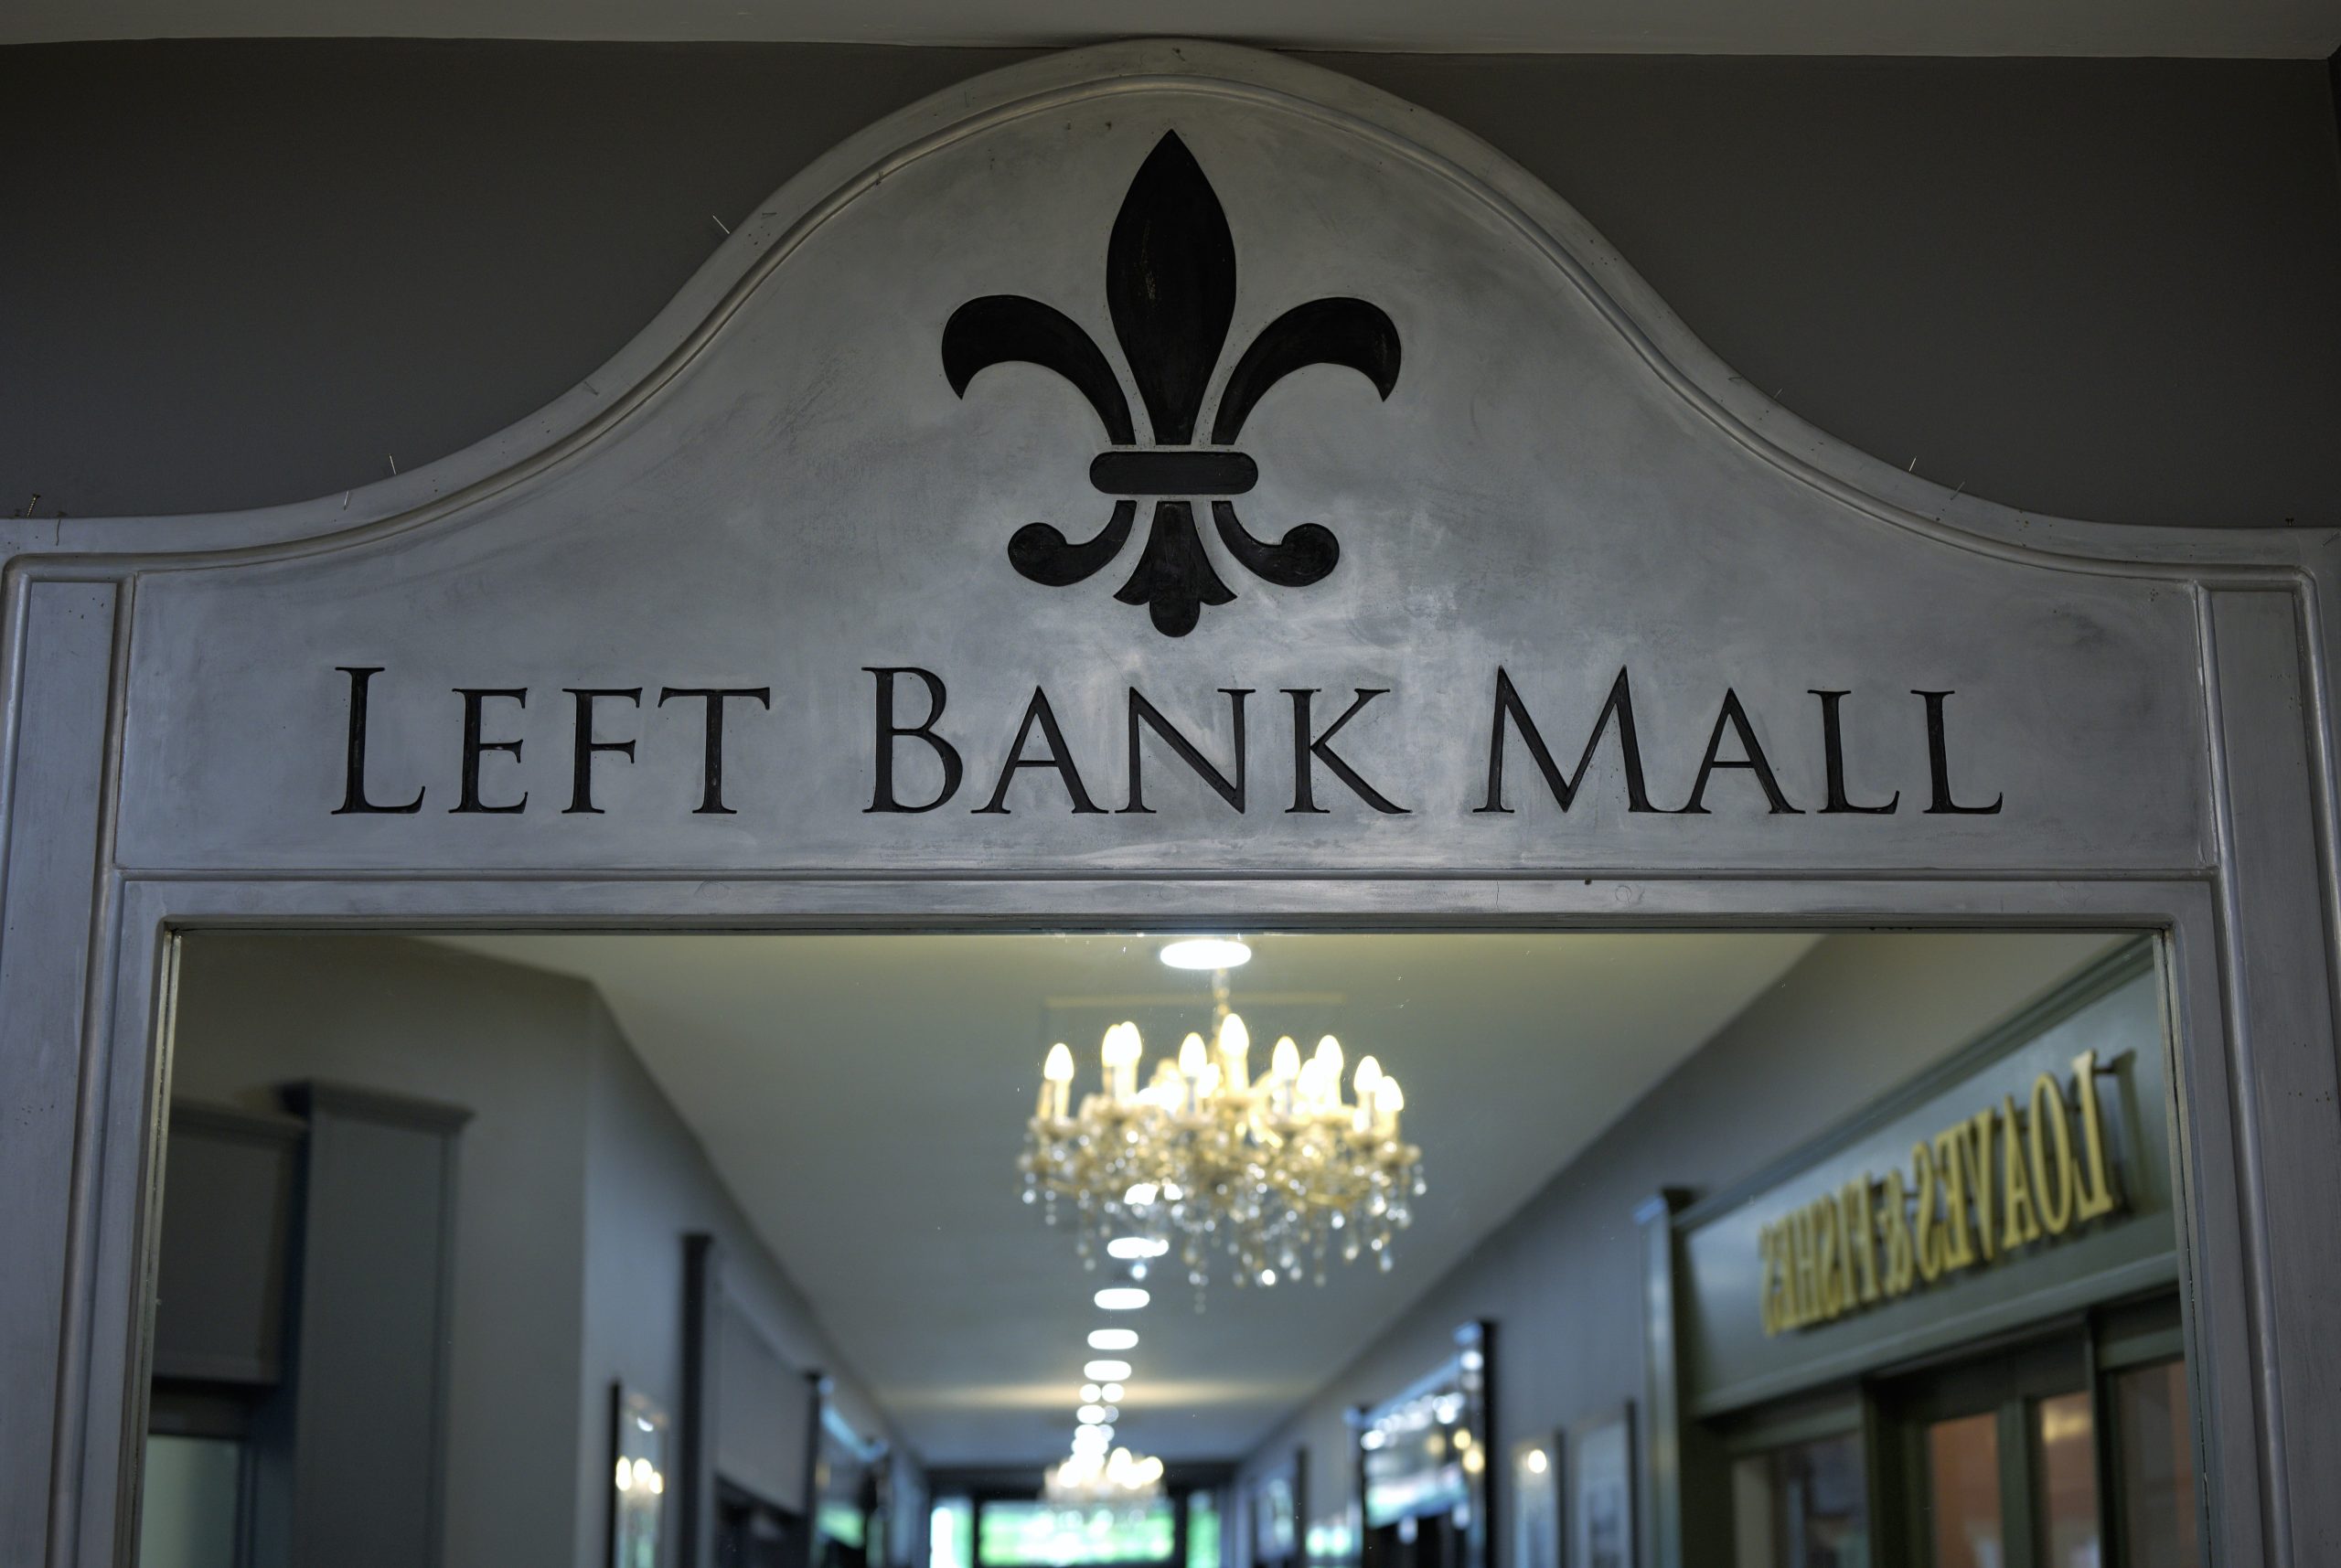 The Left Bank Mall